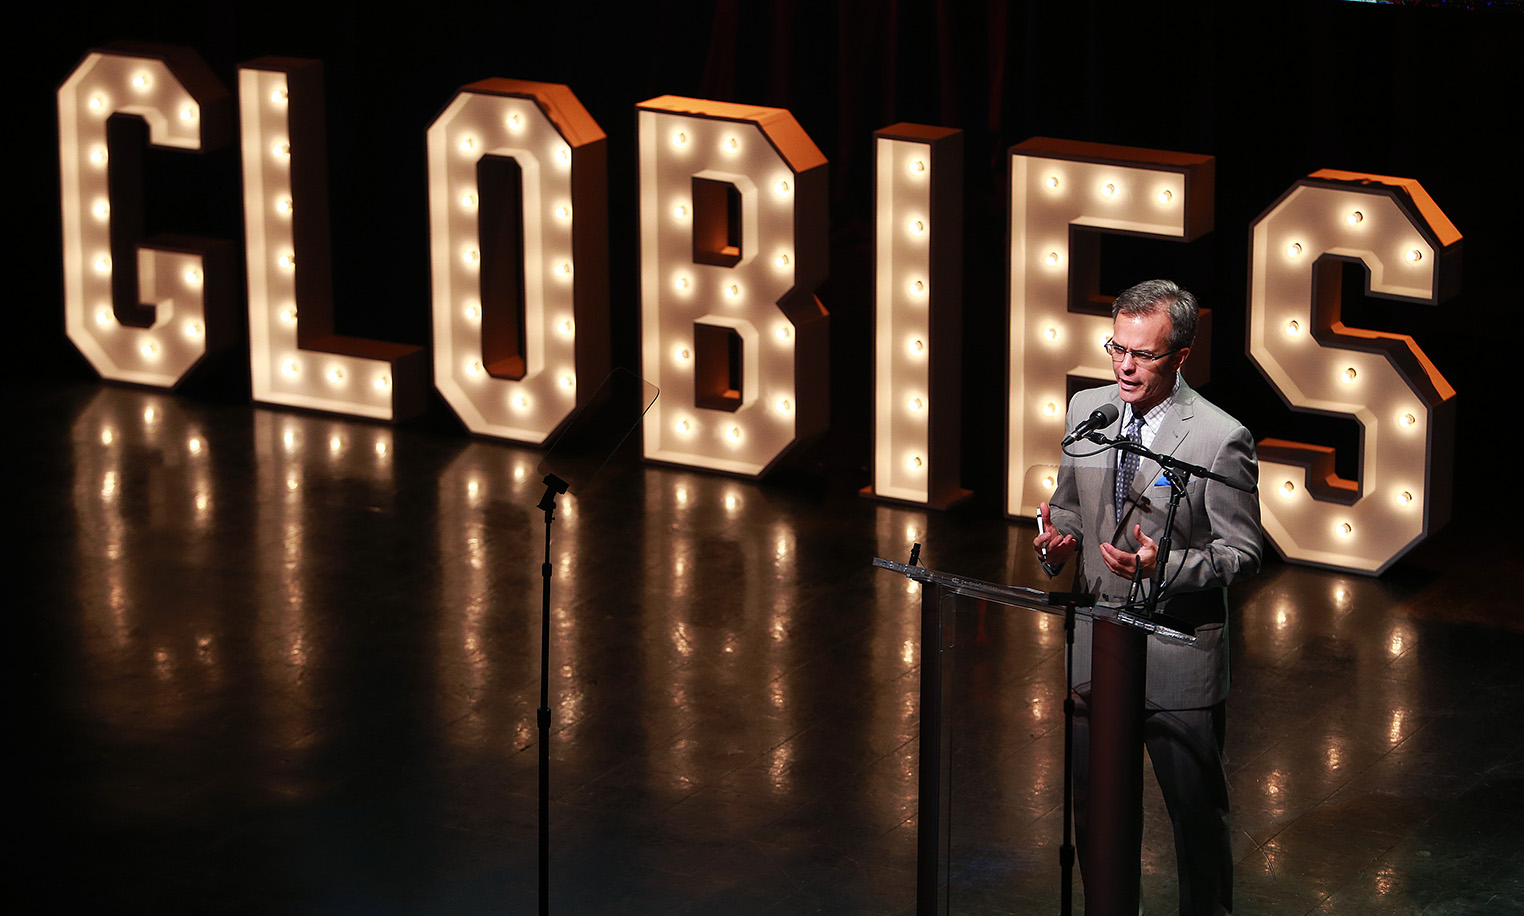 Tom Caron of NESN is pictured as he emcees the GLOBIES, held at The House of Blues in Boston, MA. December 5th, 2017 (Jim Davis/Globe Staff)